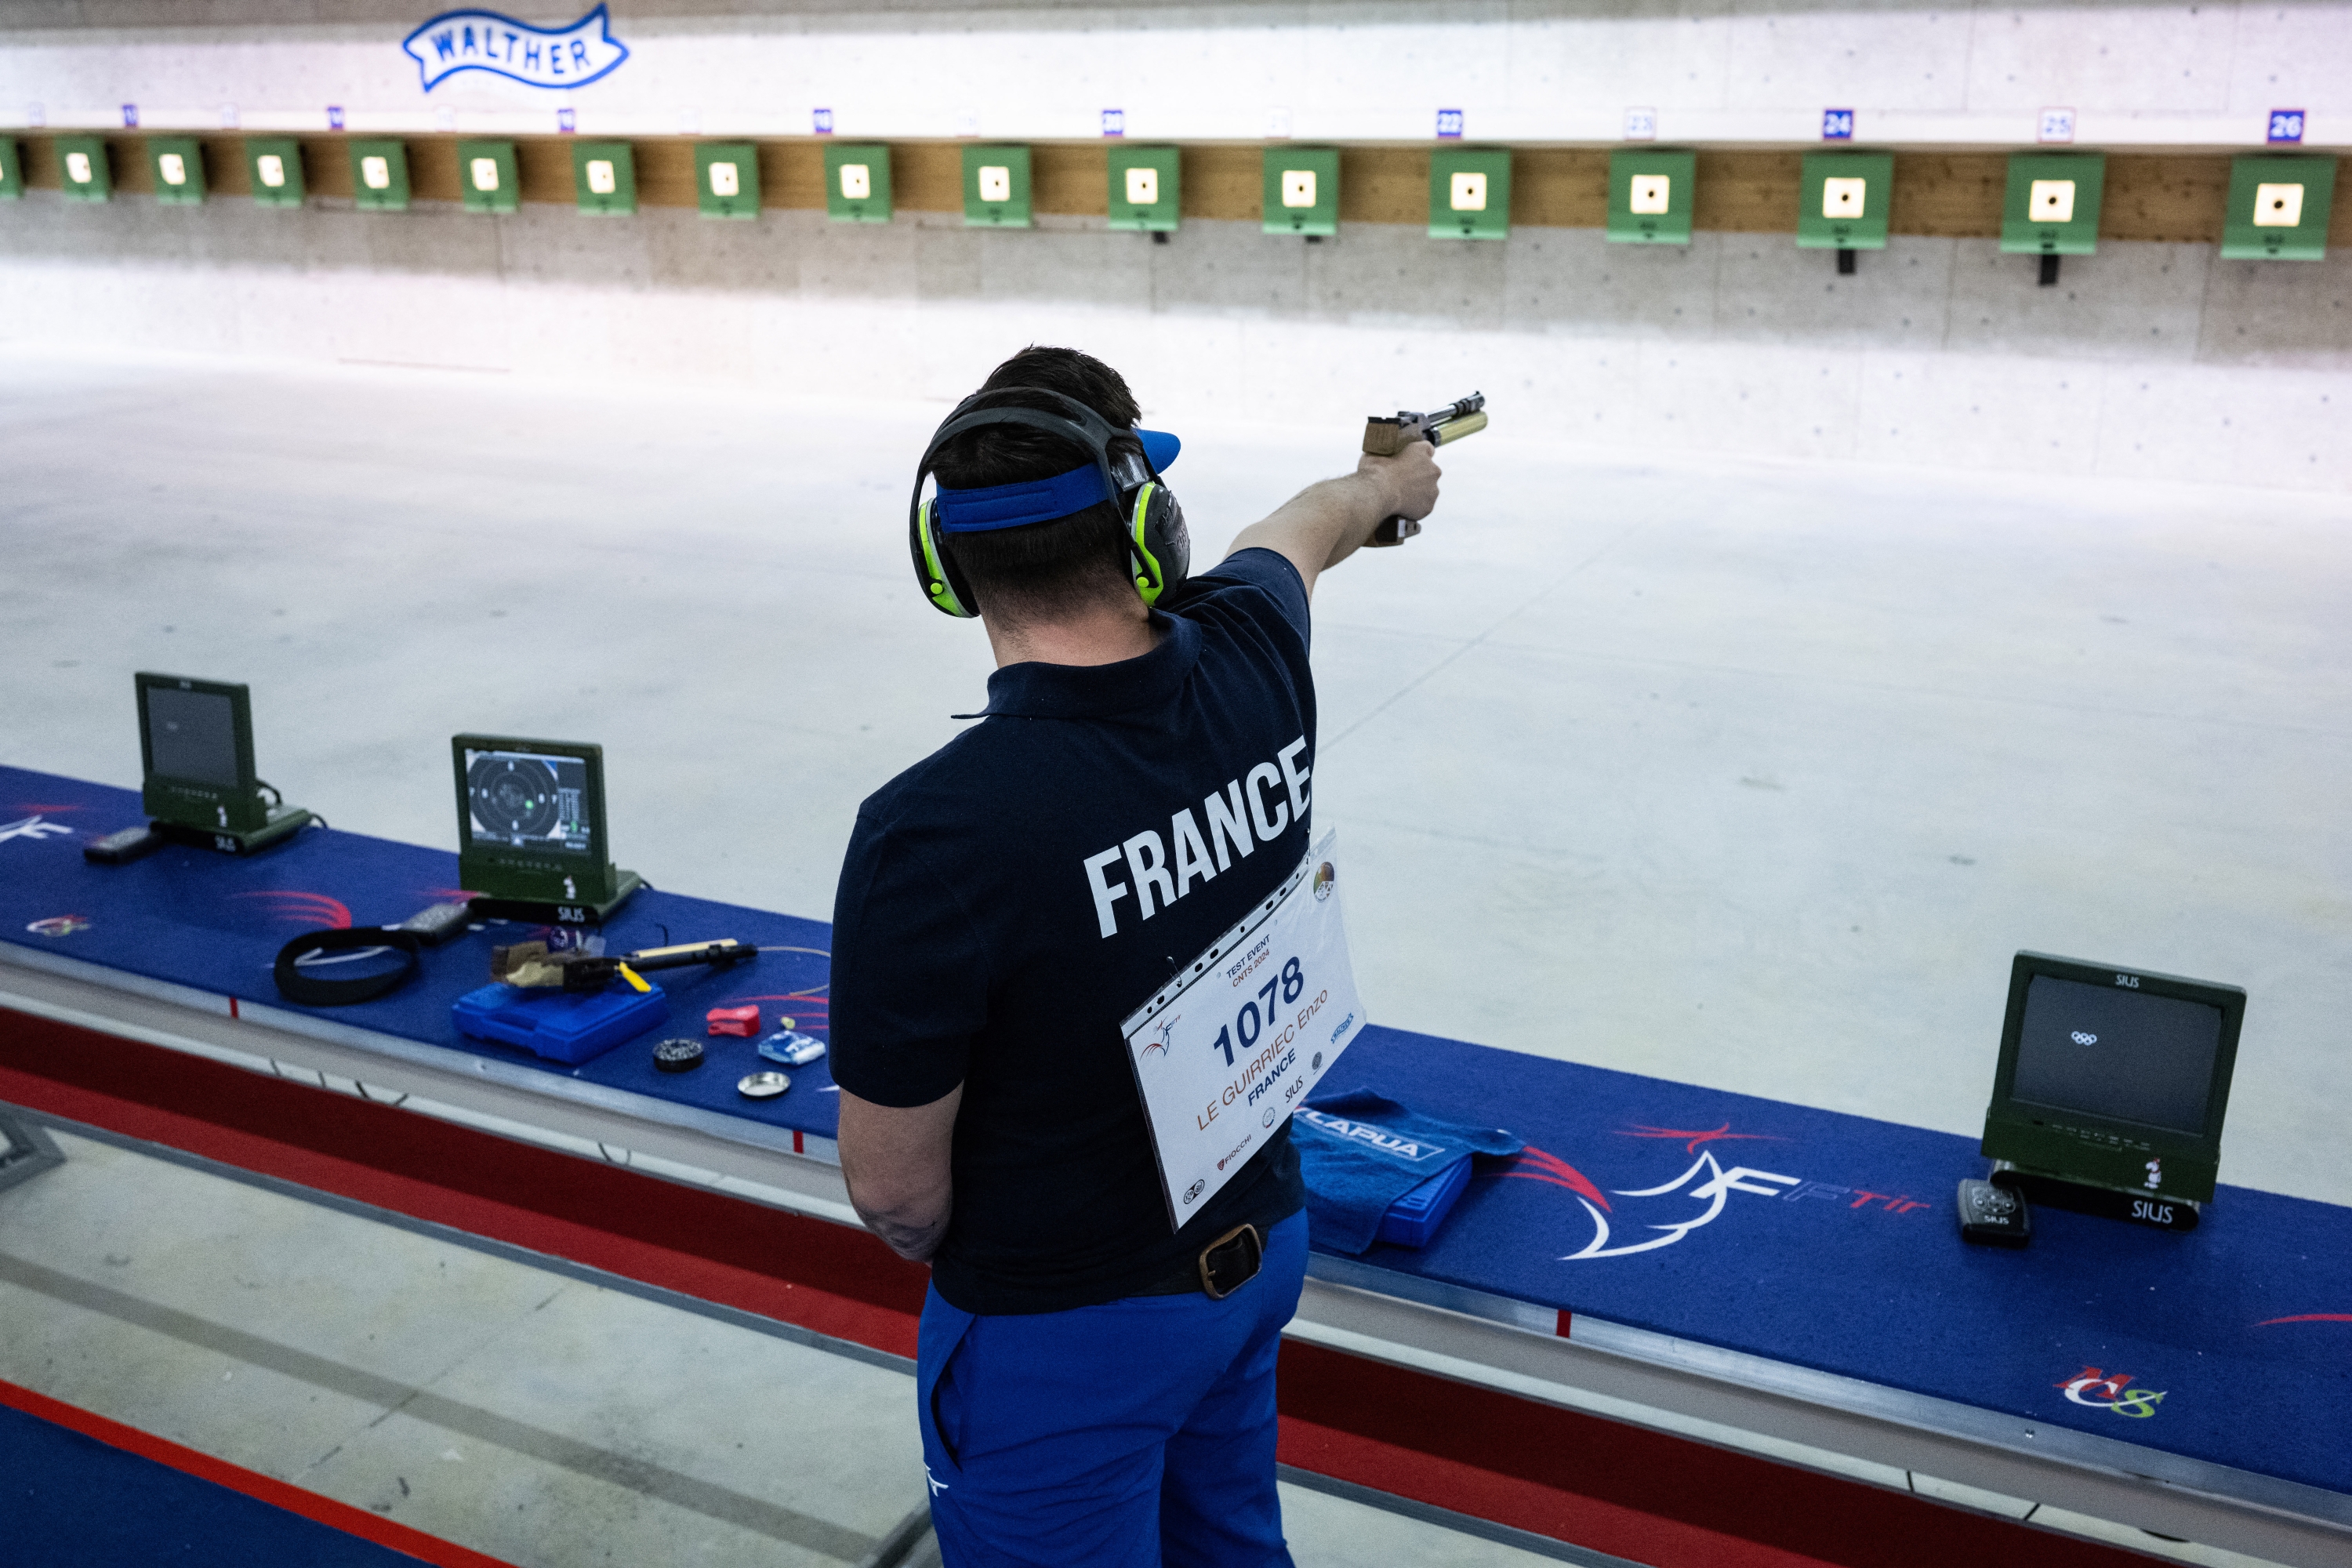 French Enzo Le Guirriec practices during the 10m air pistol training session, at the National Shooting Center (CNTS), in Deols near Châteauroux, on April 8, 2024, where the Paris 2024 Olympic Games shooting event will take place in July. (Photo by MARTIN BUREAU / AFP)